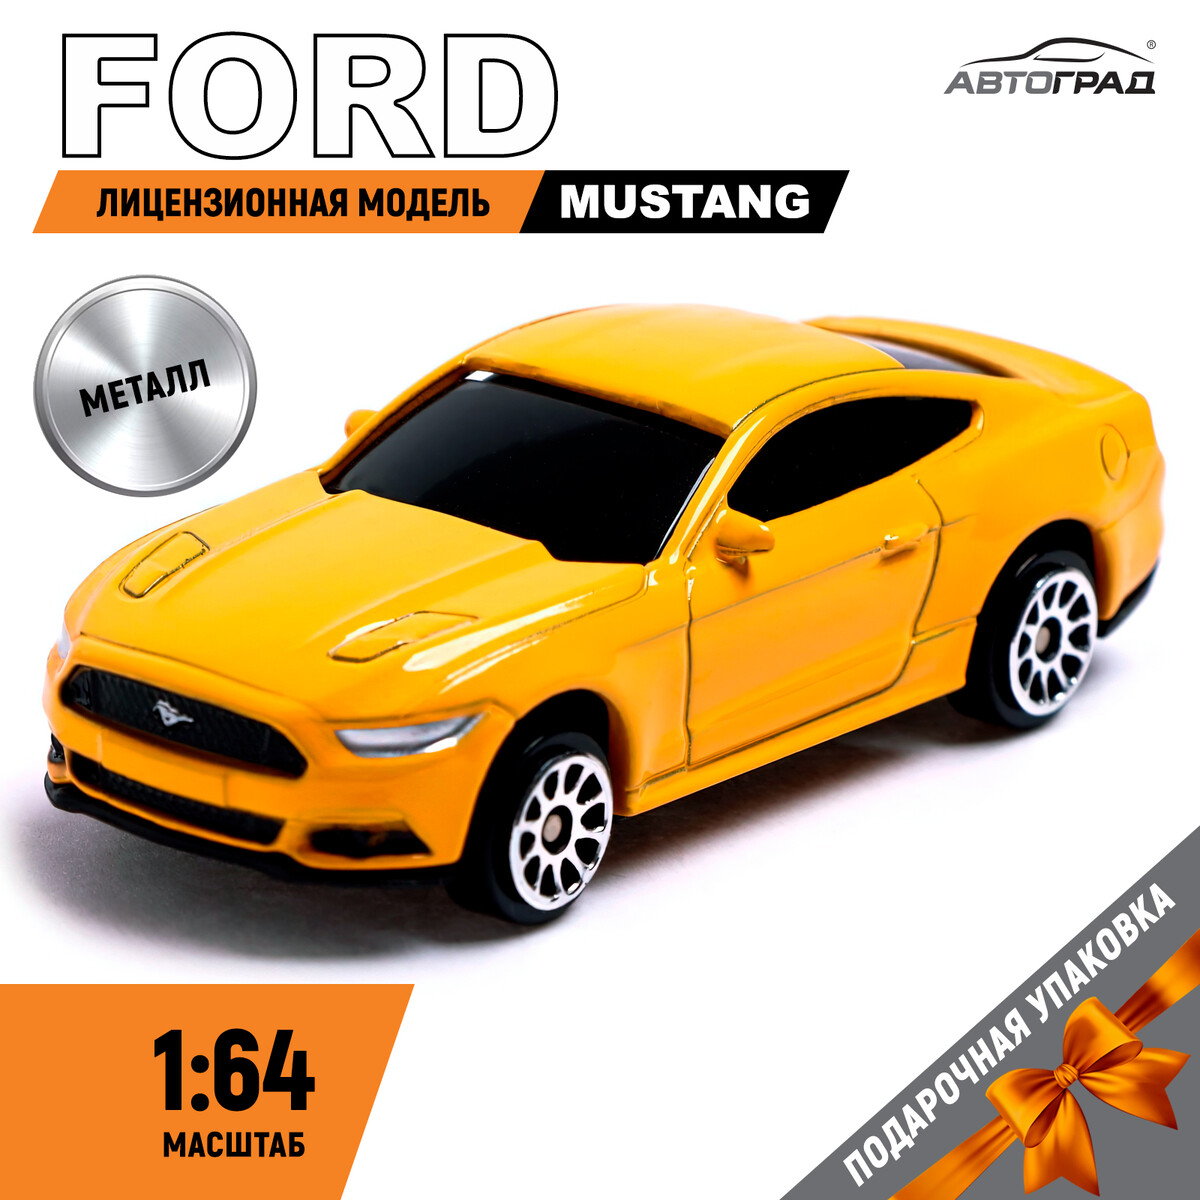 Машина металлическая ford mustang, 1:64, цвет желтый datong wolrd car remote control key fit for ford mondeo 2 0t kuga mustang edge ds7t 15k601 d id49 chip 434mhz replace keyless go